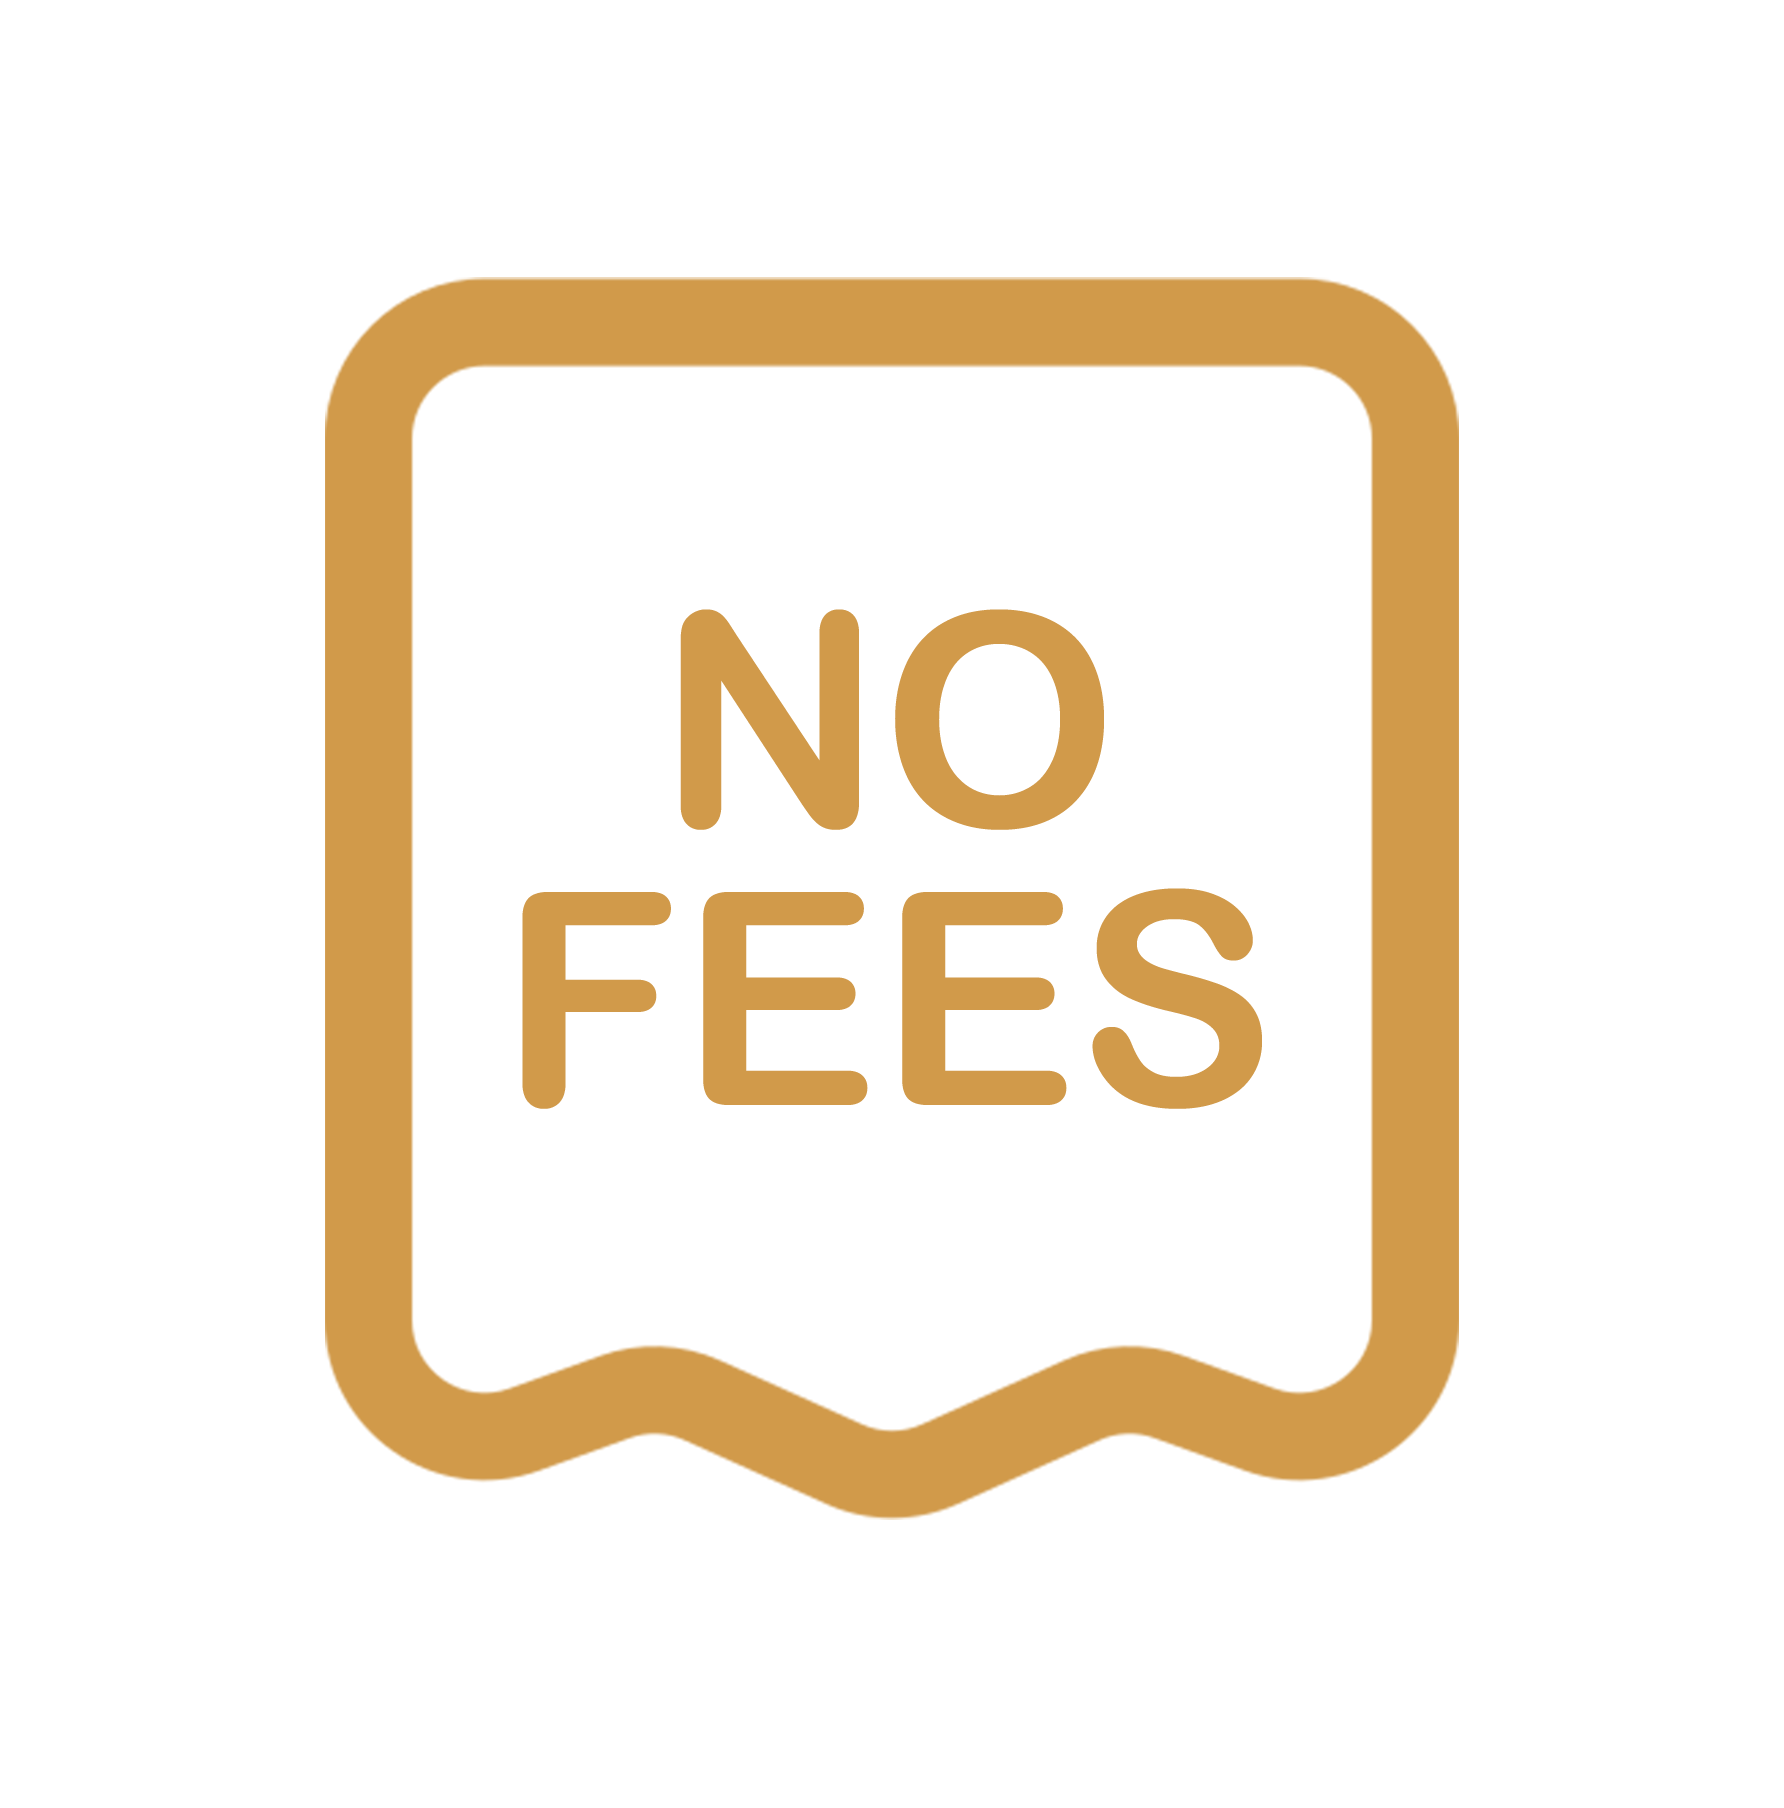 waived-fees-icon-3